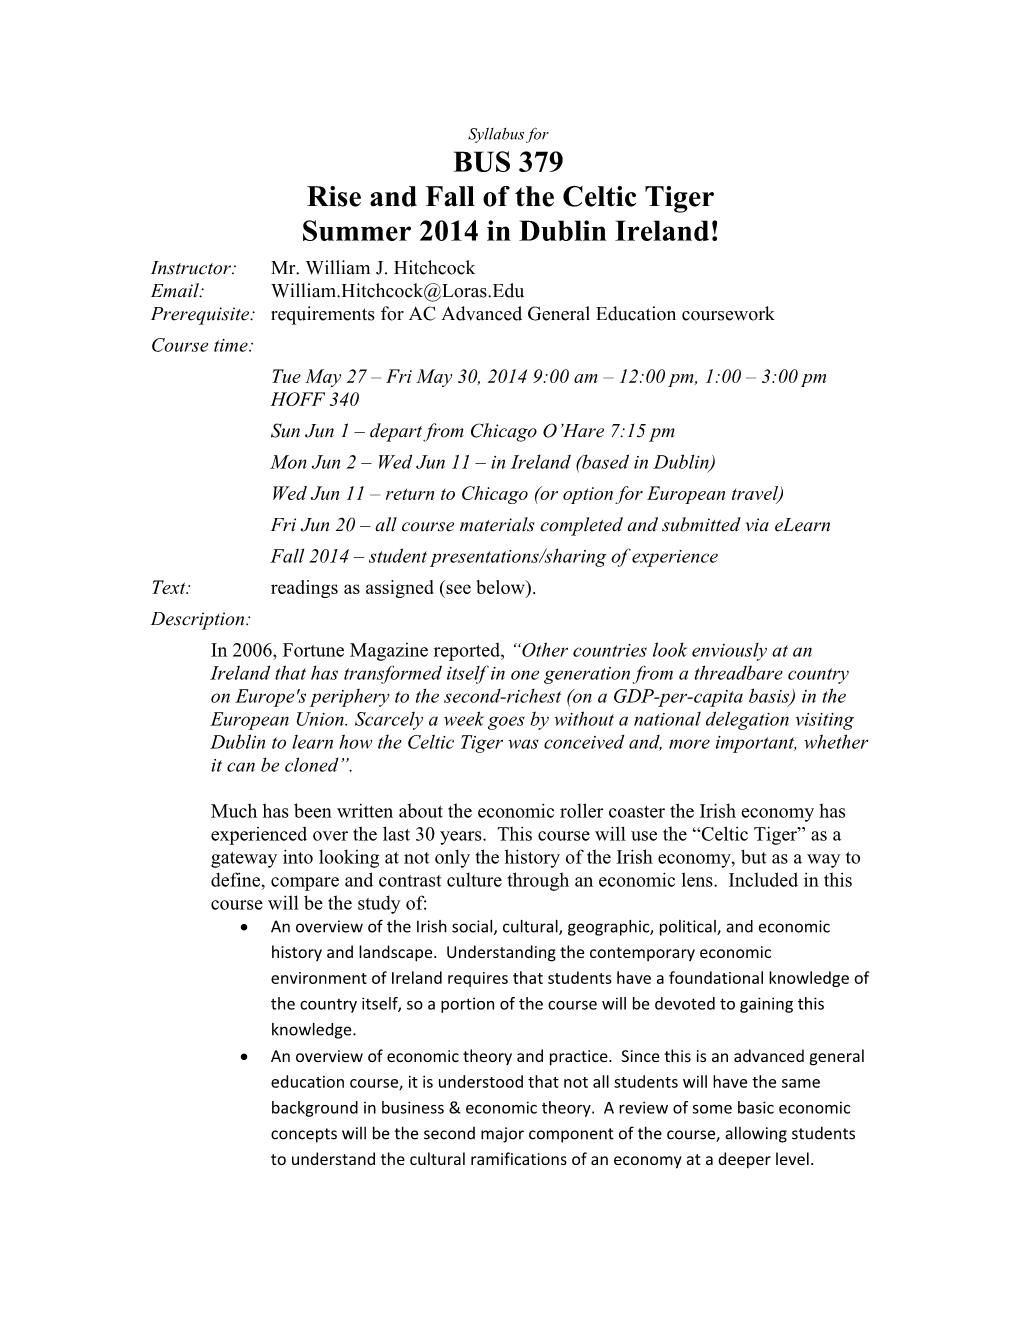 Syllabus for BUS 379 Rise and Fall of the Celtic Tiger Summer 2014 in Dublin Ireland!